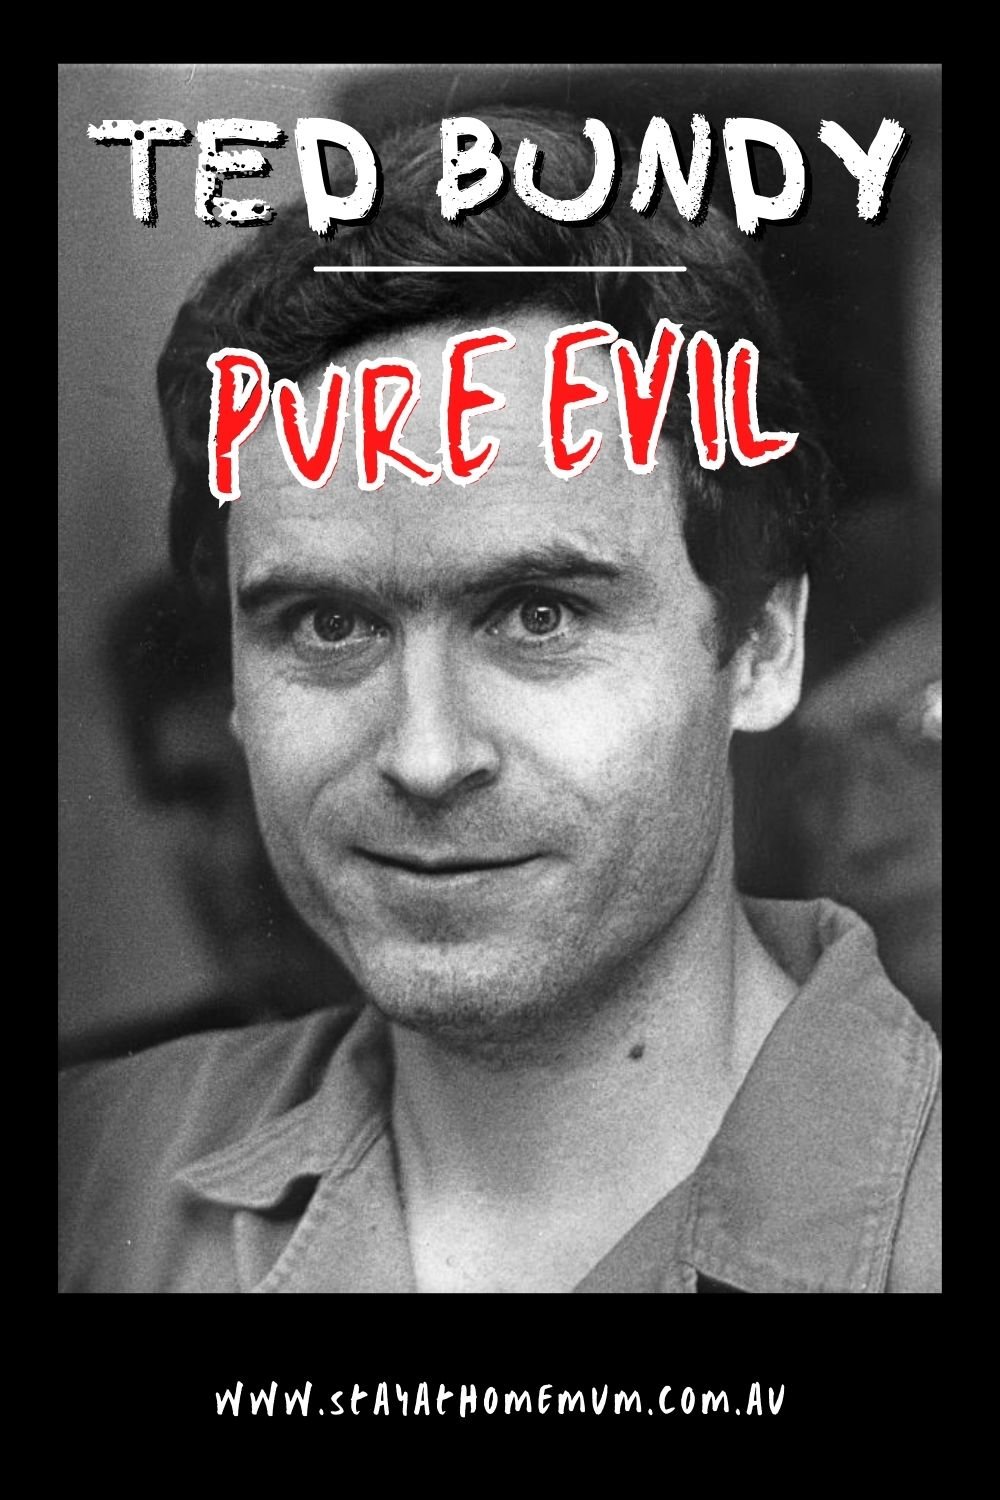 Ted Bundy - Pure Evil | Stay at Home Mum